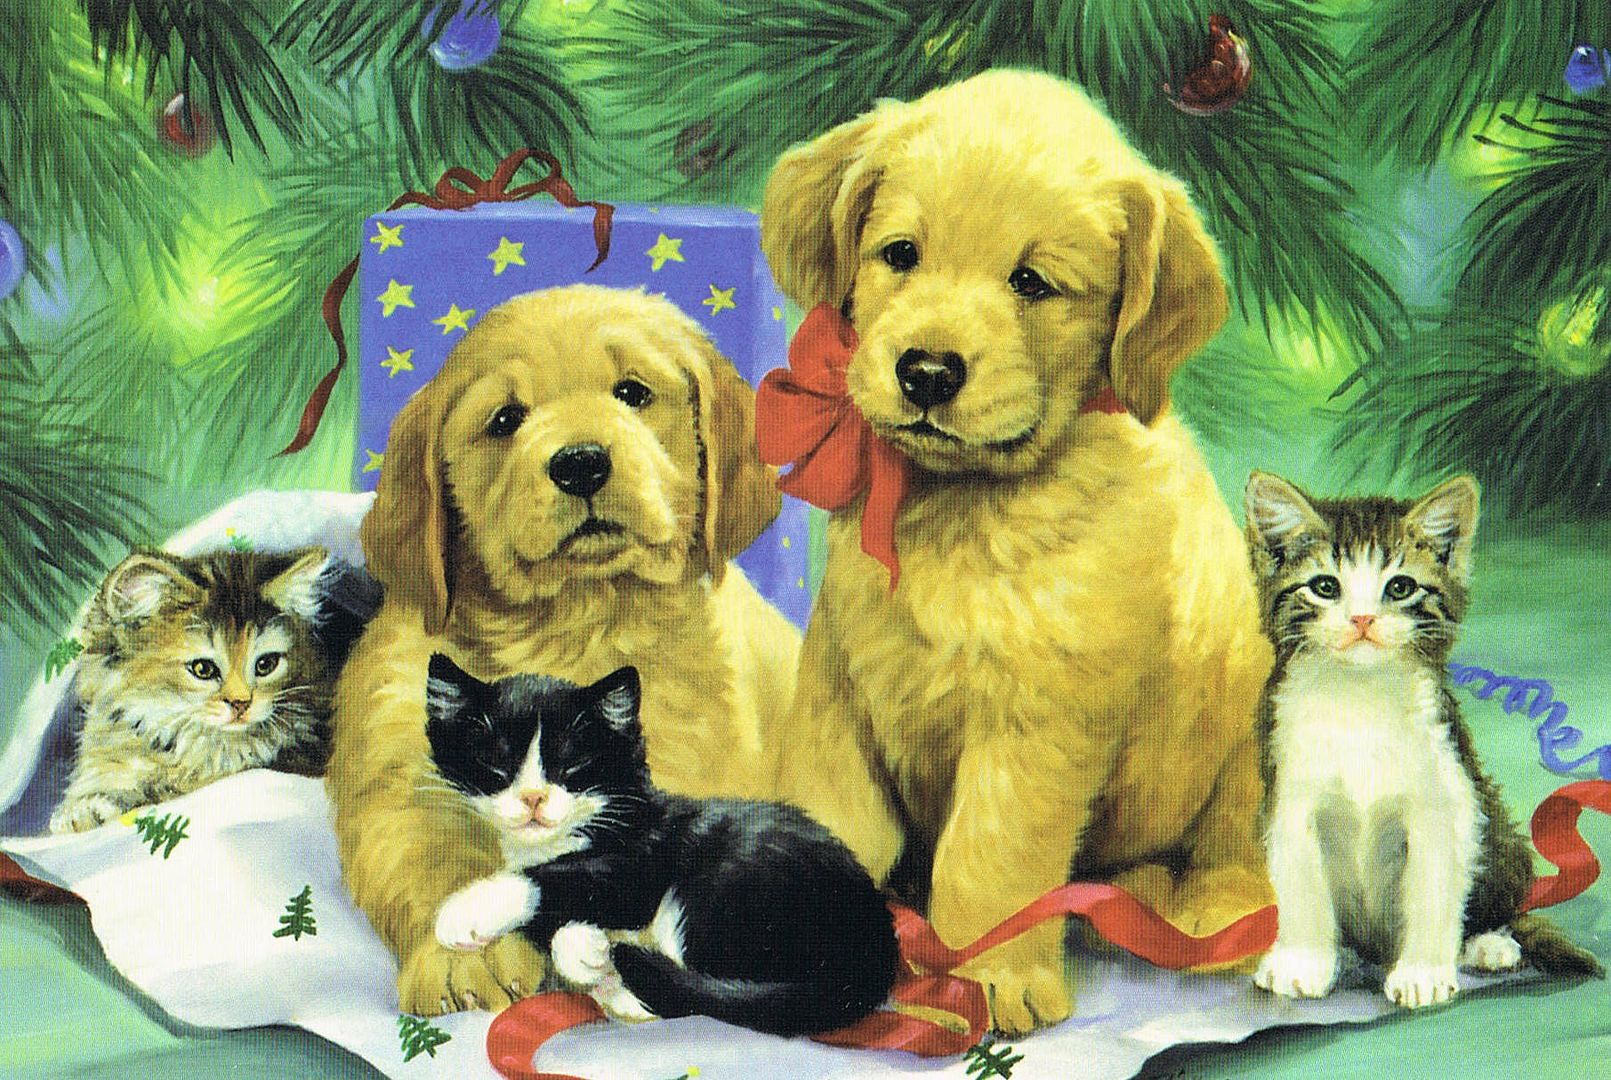 Christmas card scanned in by Angie Ouellette-Tower for https://www.godsgrowinggarden.com/ photo Christmas1_zps3chh97ae.jpg